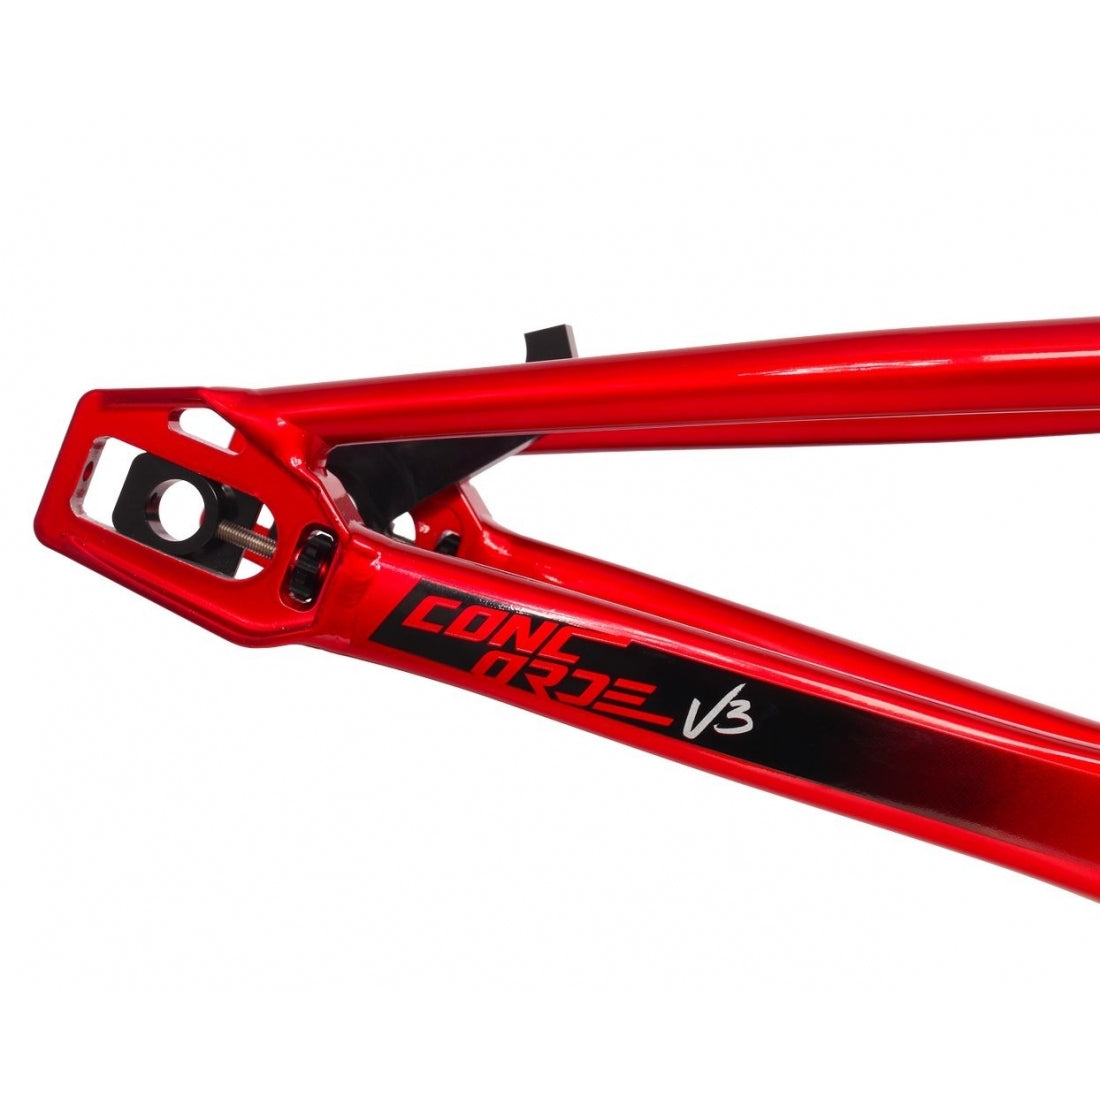 Close-up of a hydroformed aluminum Inspyre Concorde V3 Pro XXL BMX Race frame with the text "Inspyre Concorde V3 Pro XXL Frame" printed on it.